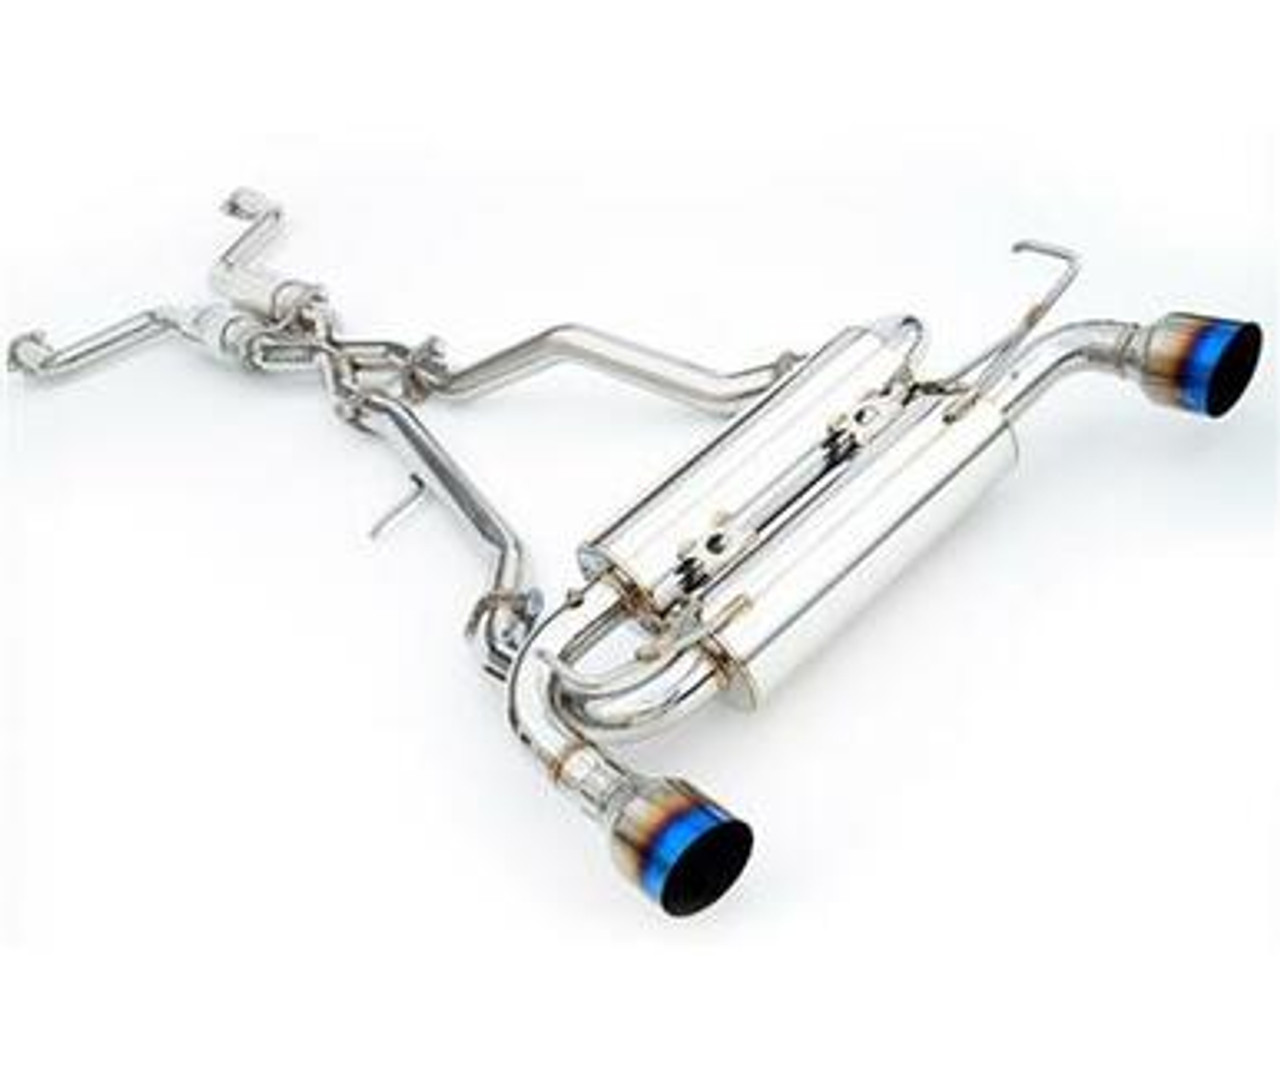 Invidia 07+ Infiniti G37 Coupe Gemini Rolled Stainless Steel Tip Cat-back Exhaust